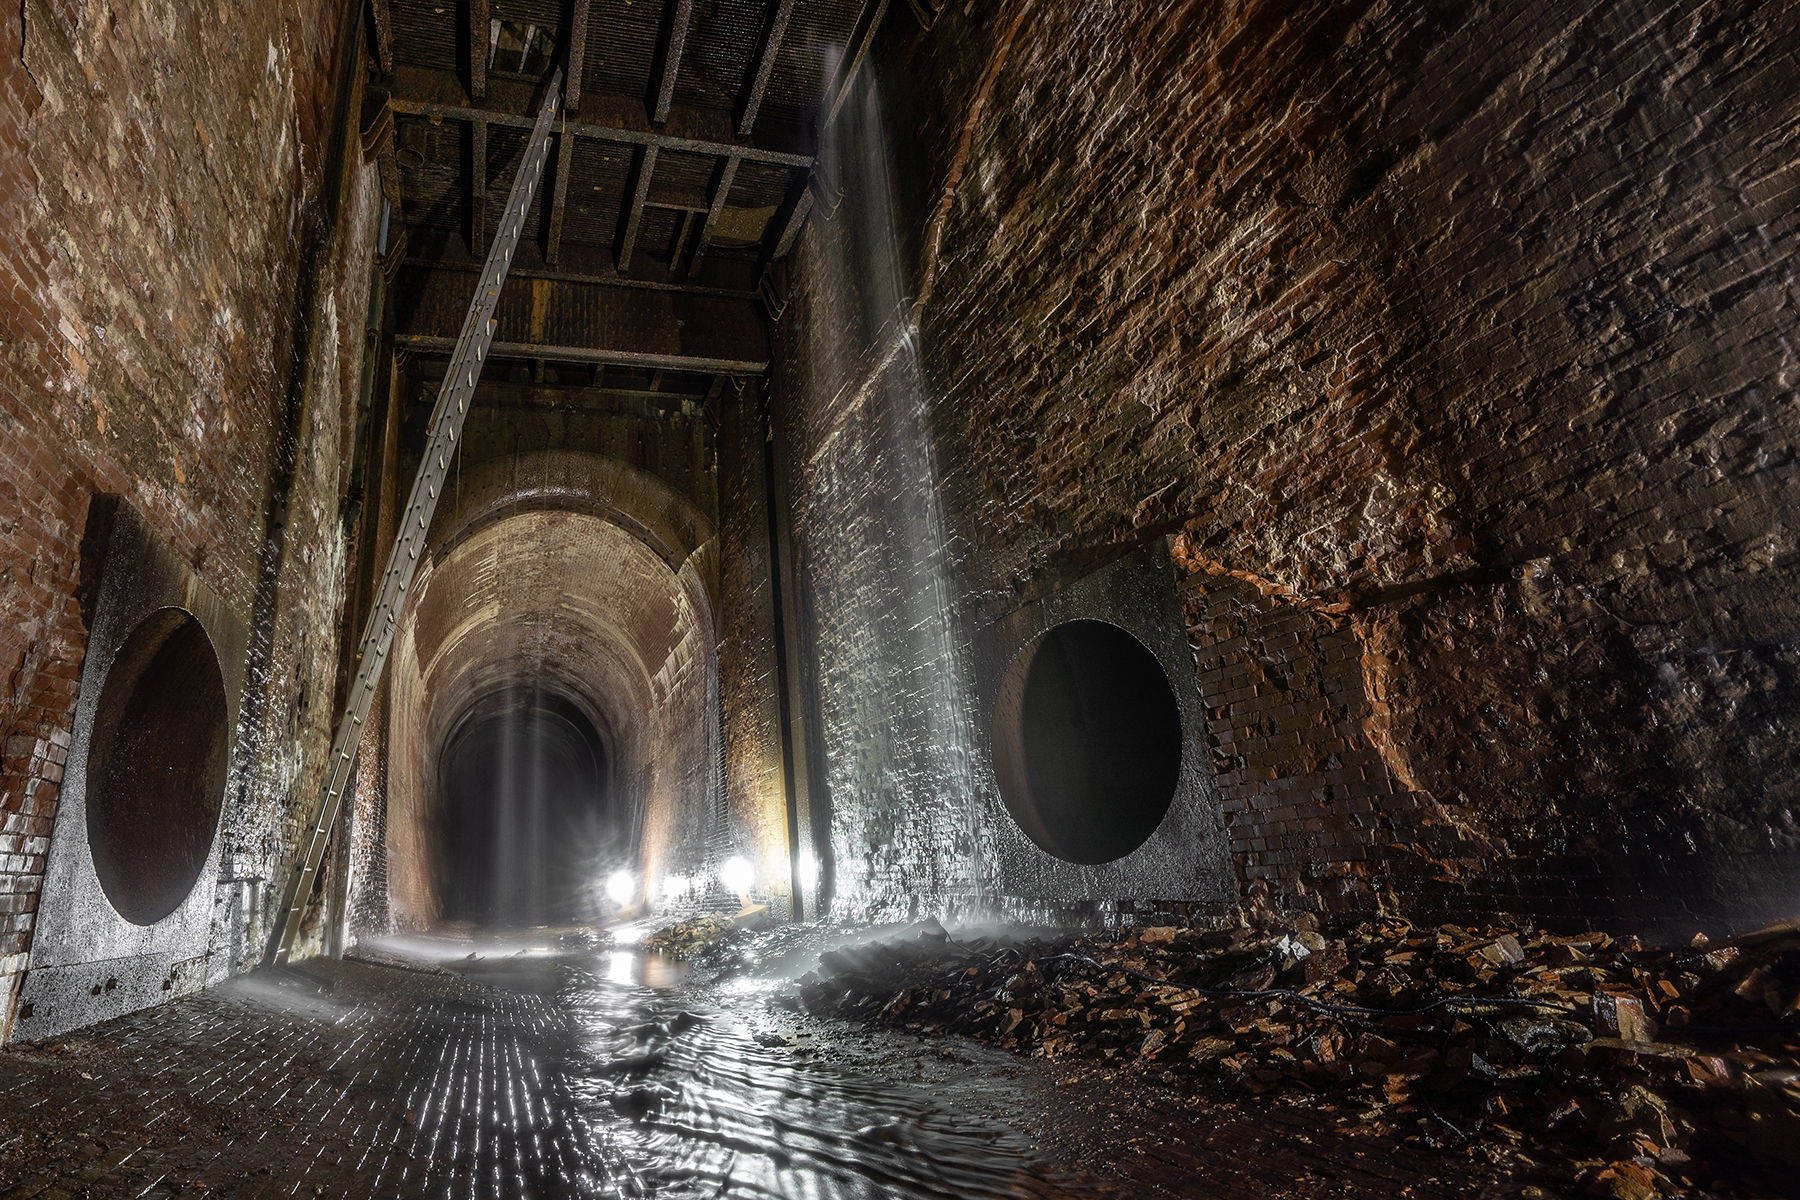 The power station wheel pit. Though some of the brick facing had crumbled over the years, the structure was in good condition when the Niagara Parks team reviewed it before renovations. (Image courtesy of Niagara Parks)